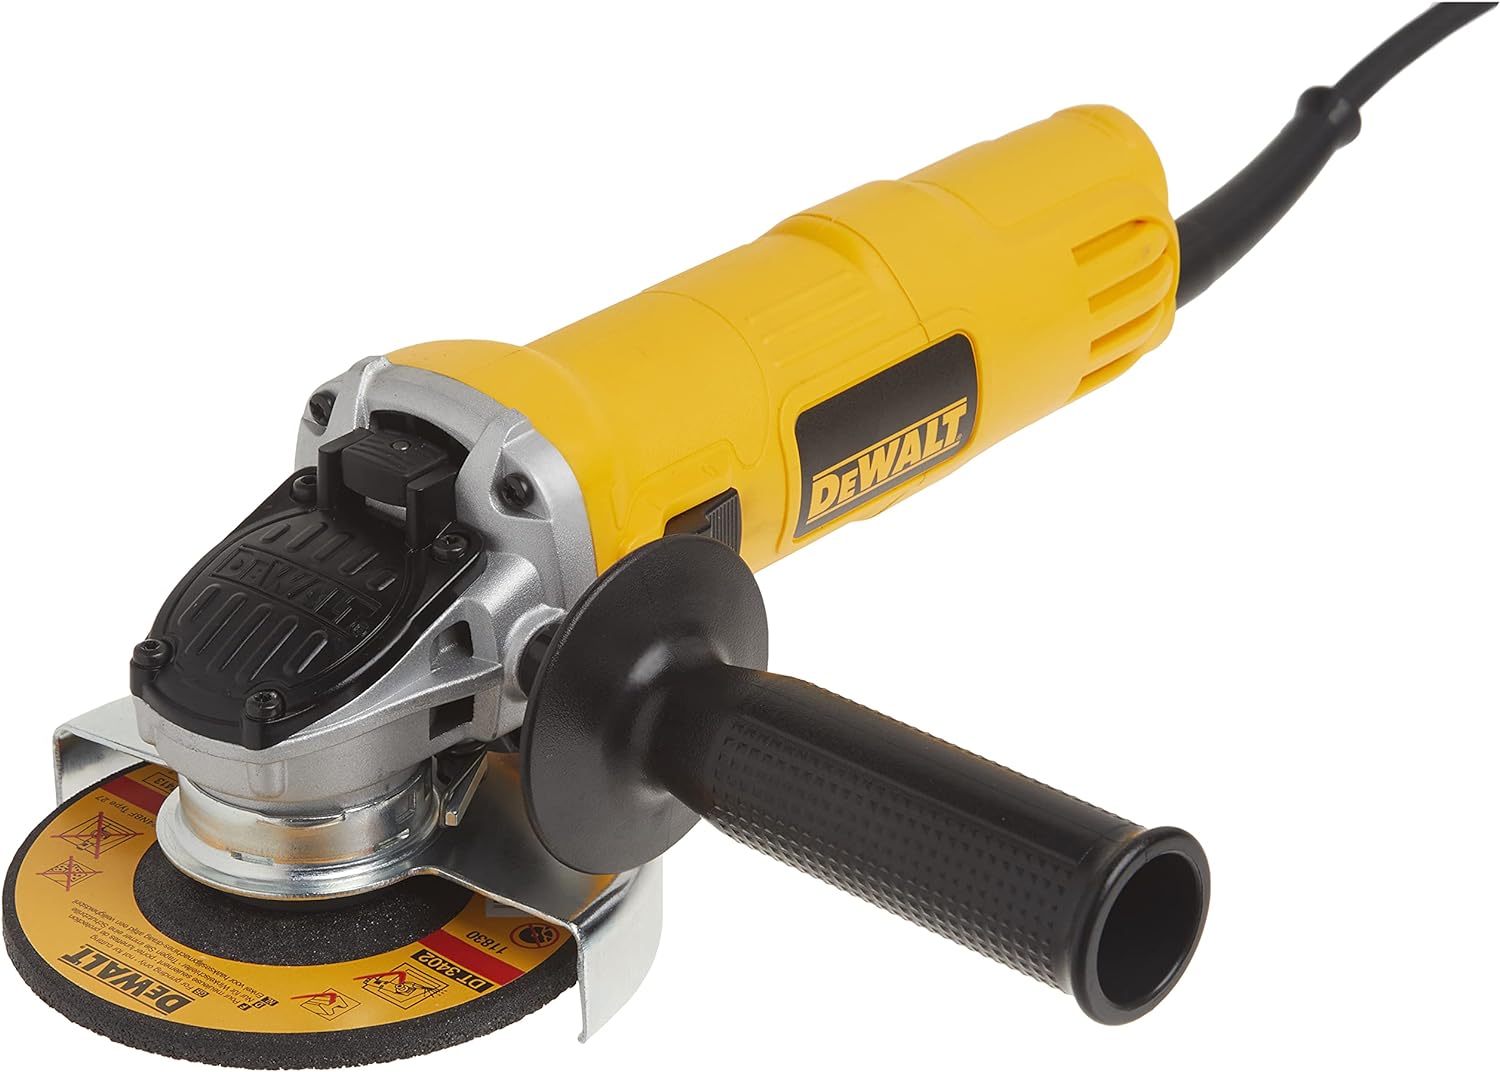 DEWALT Angle Grinder, One-Touch Guard, 4-1/2 -Inch (DWE4011),Yellow